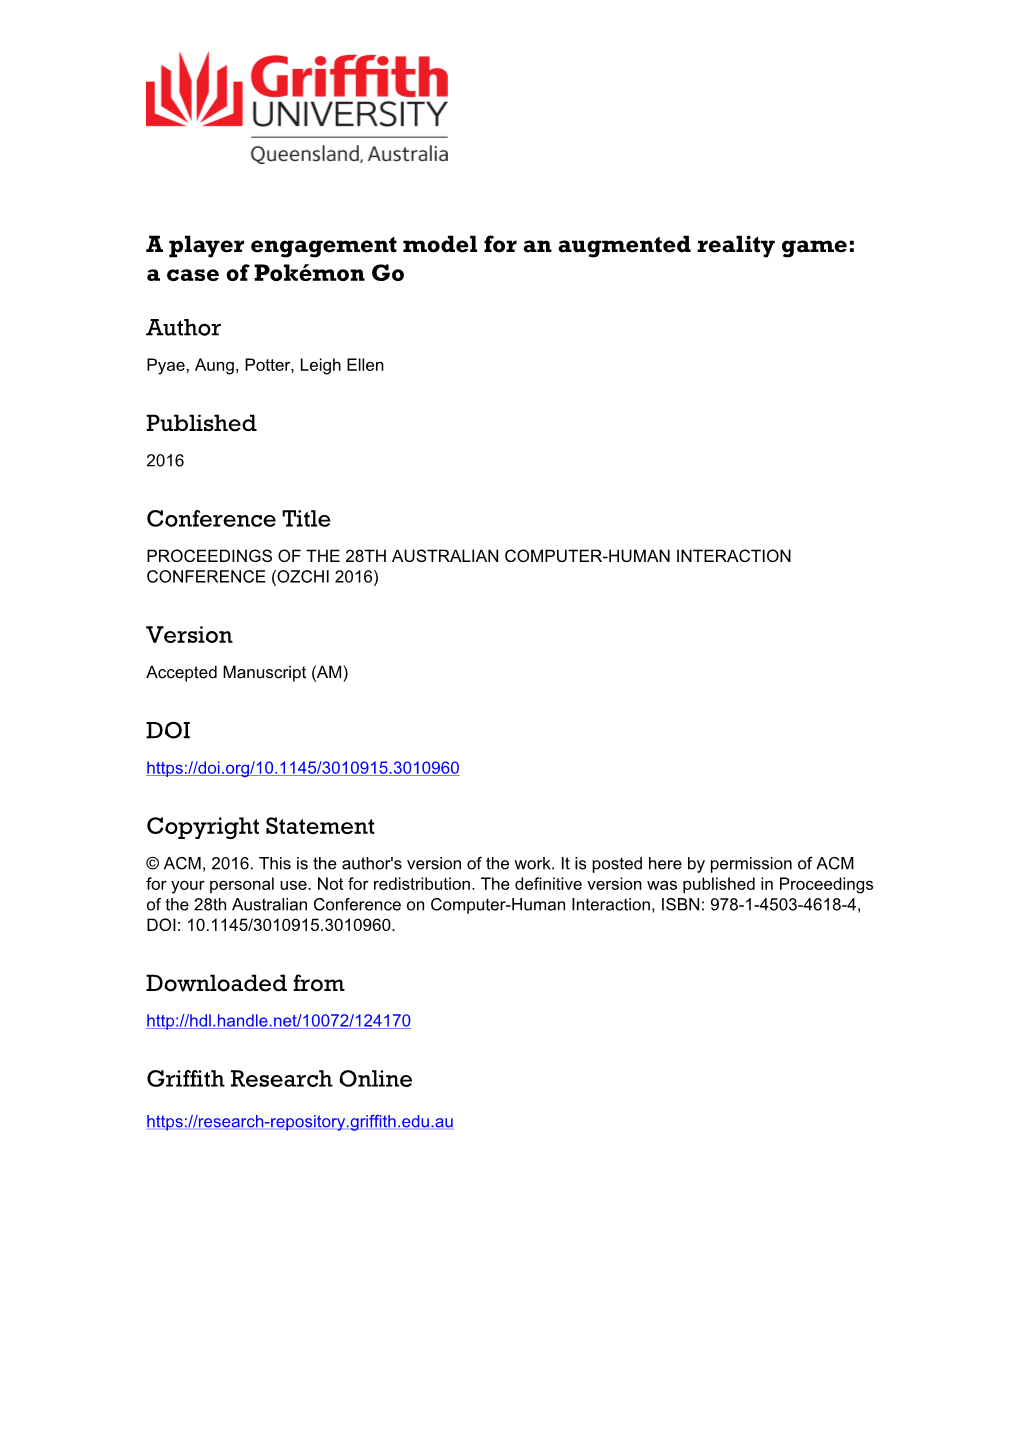 A Player Engagement Model for an Augmented Reality Game: a Case of Pokémon Go